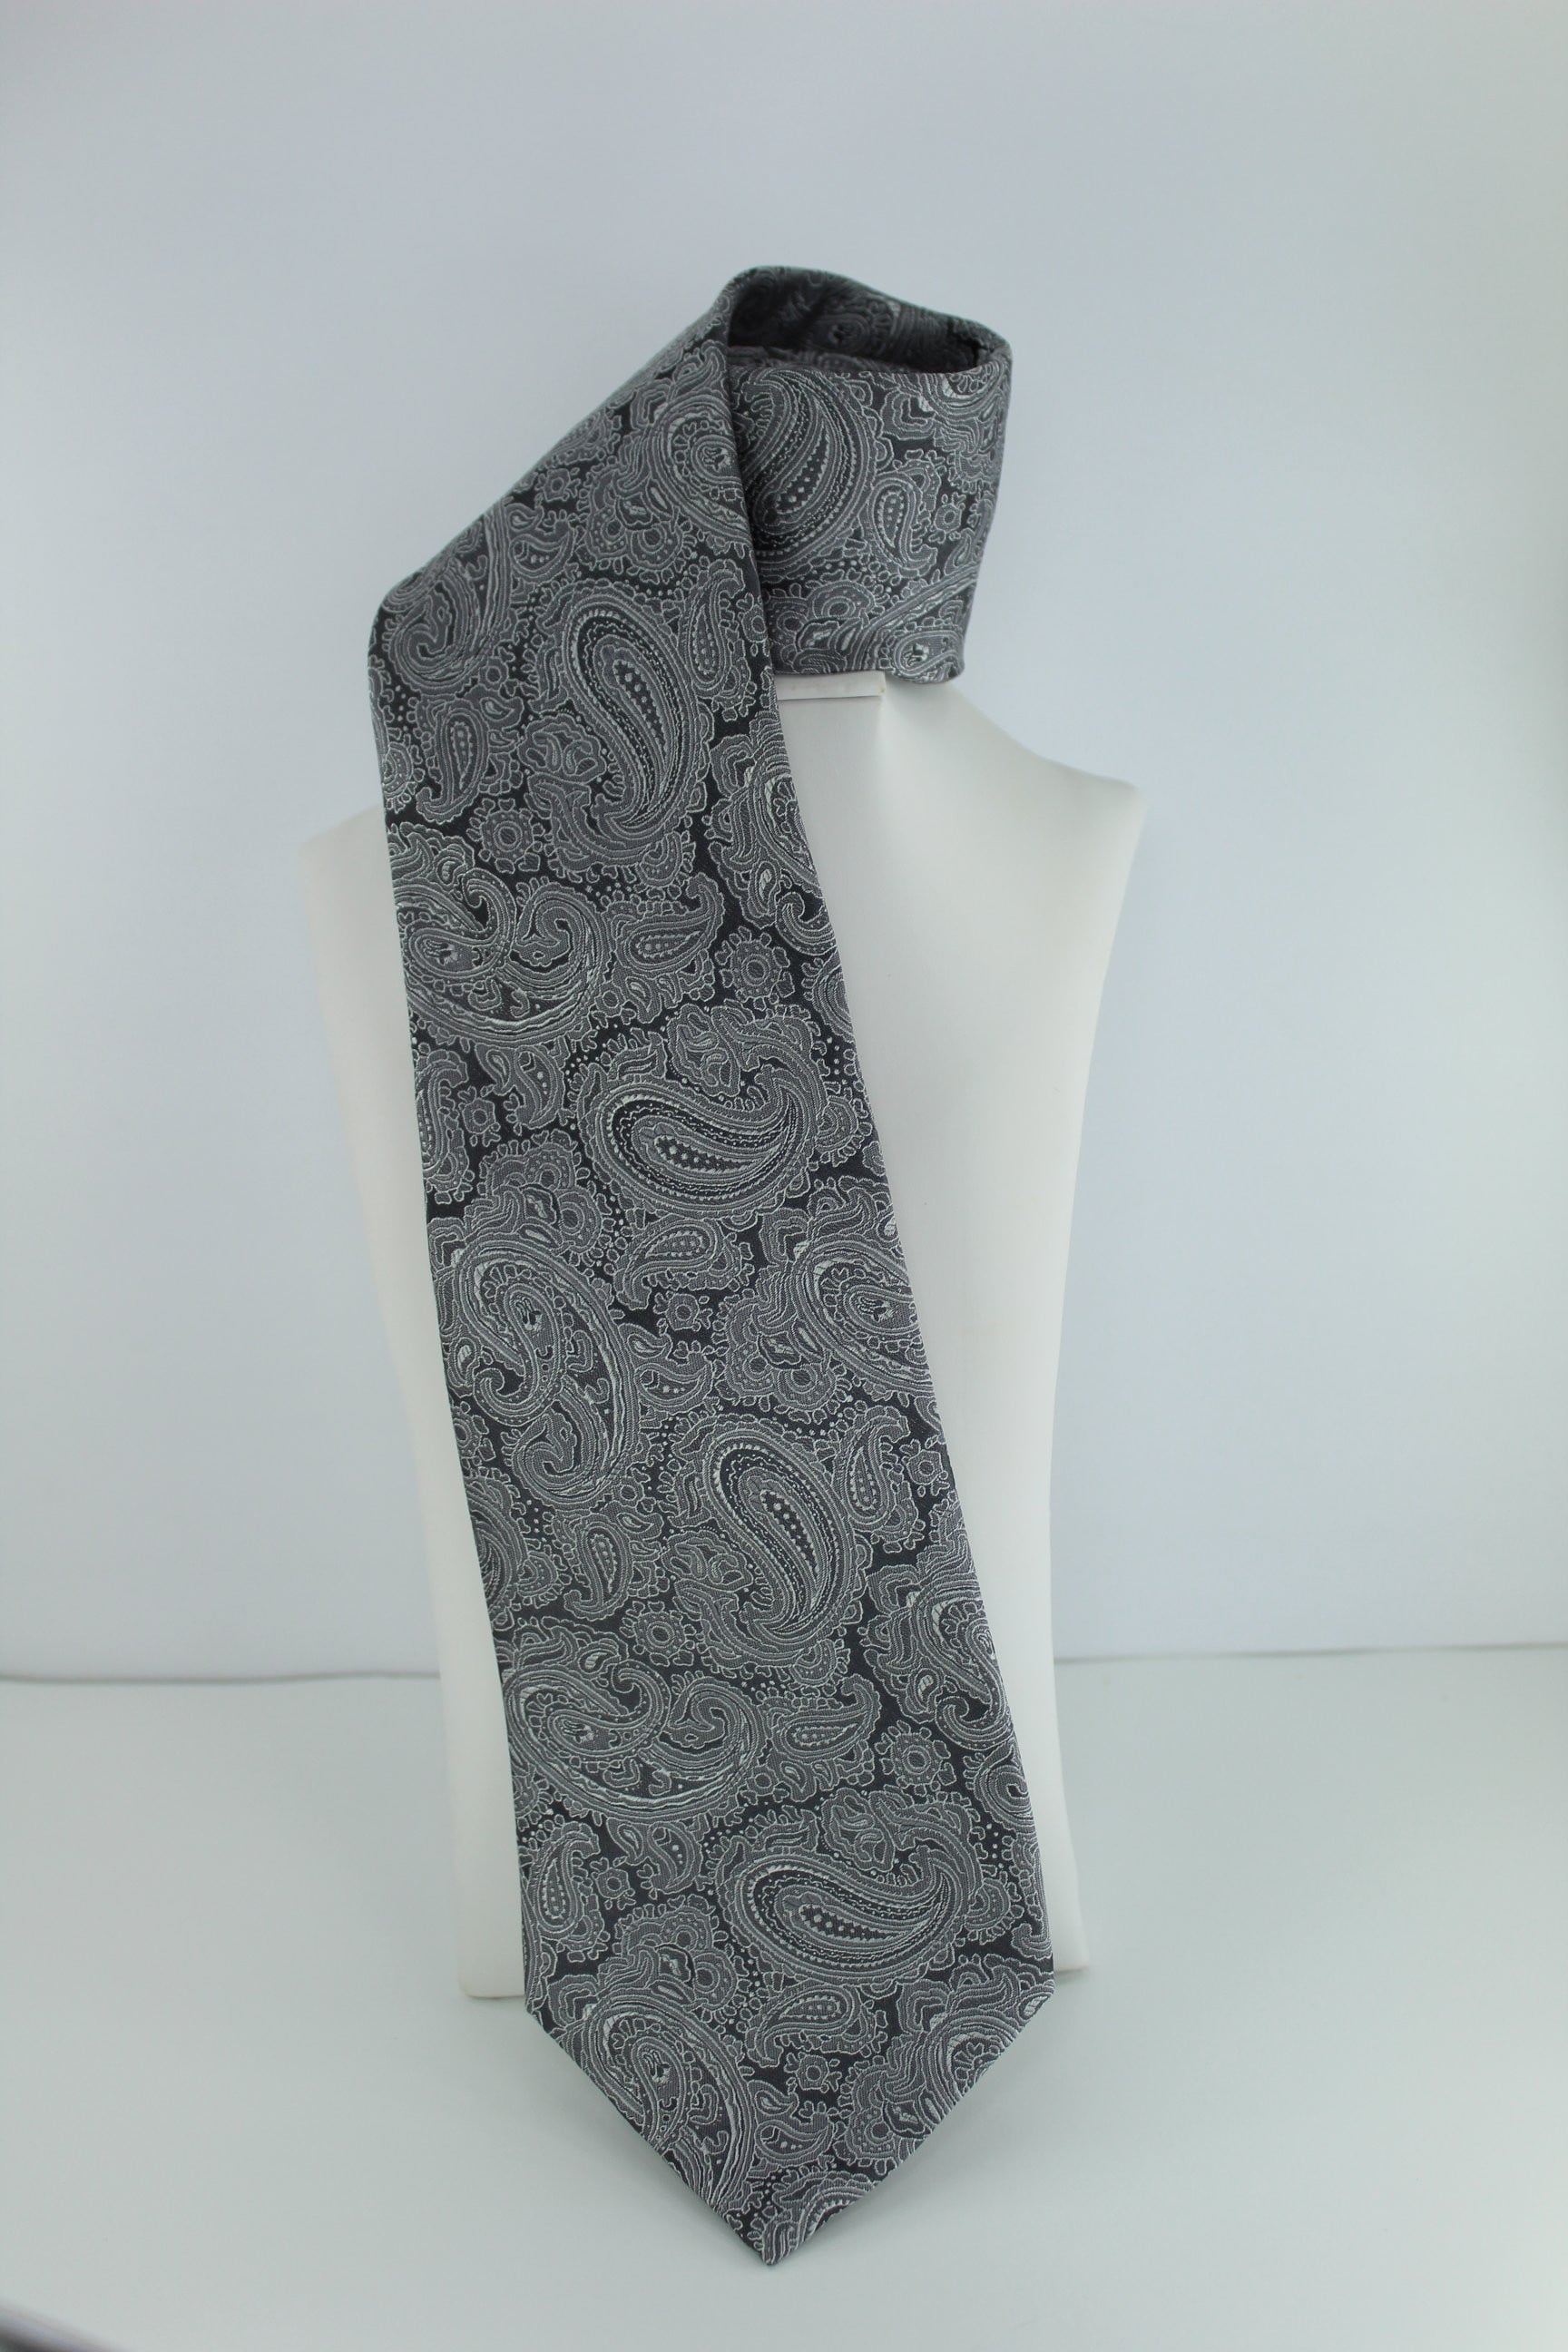 Tasso Elba Elegant Silk Tie - Silver and Black Classic Paisley for the most fastidious of tie wearers